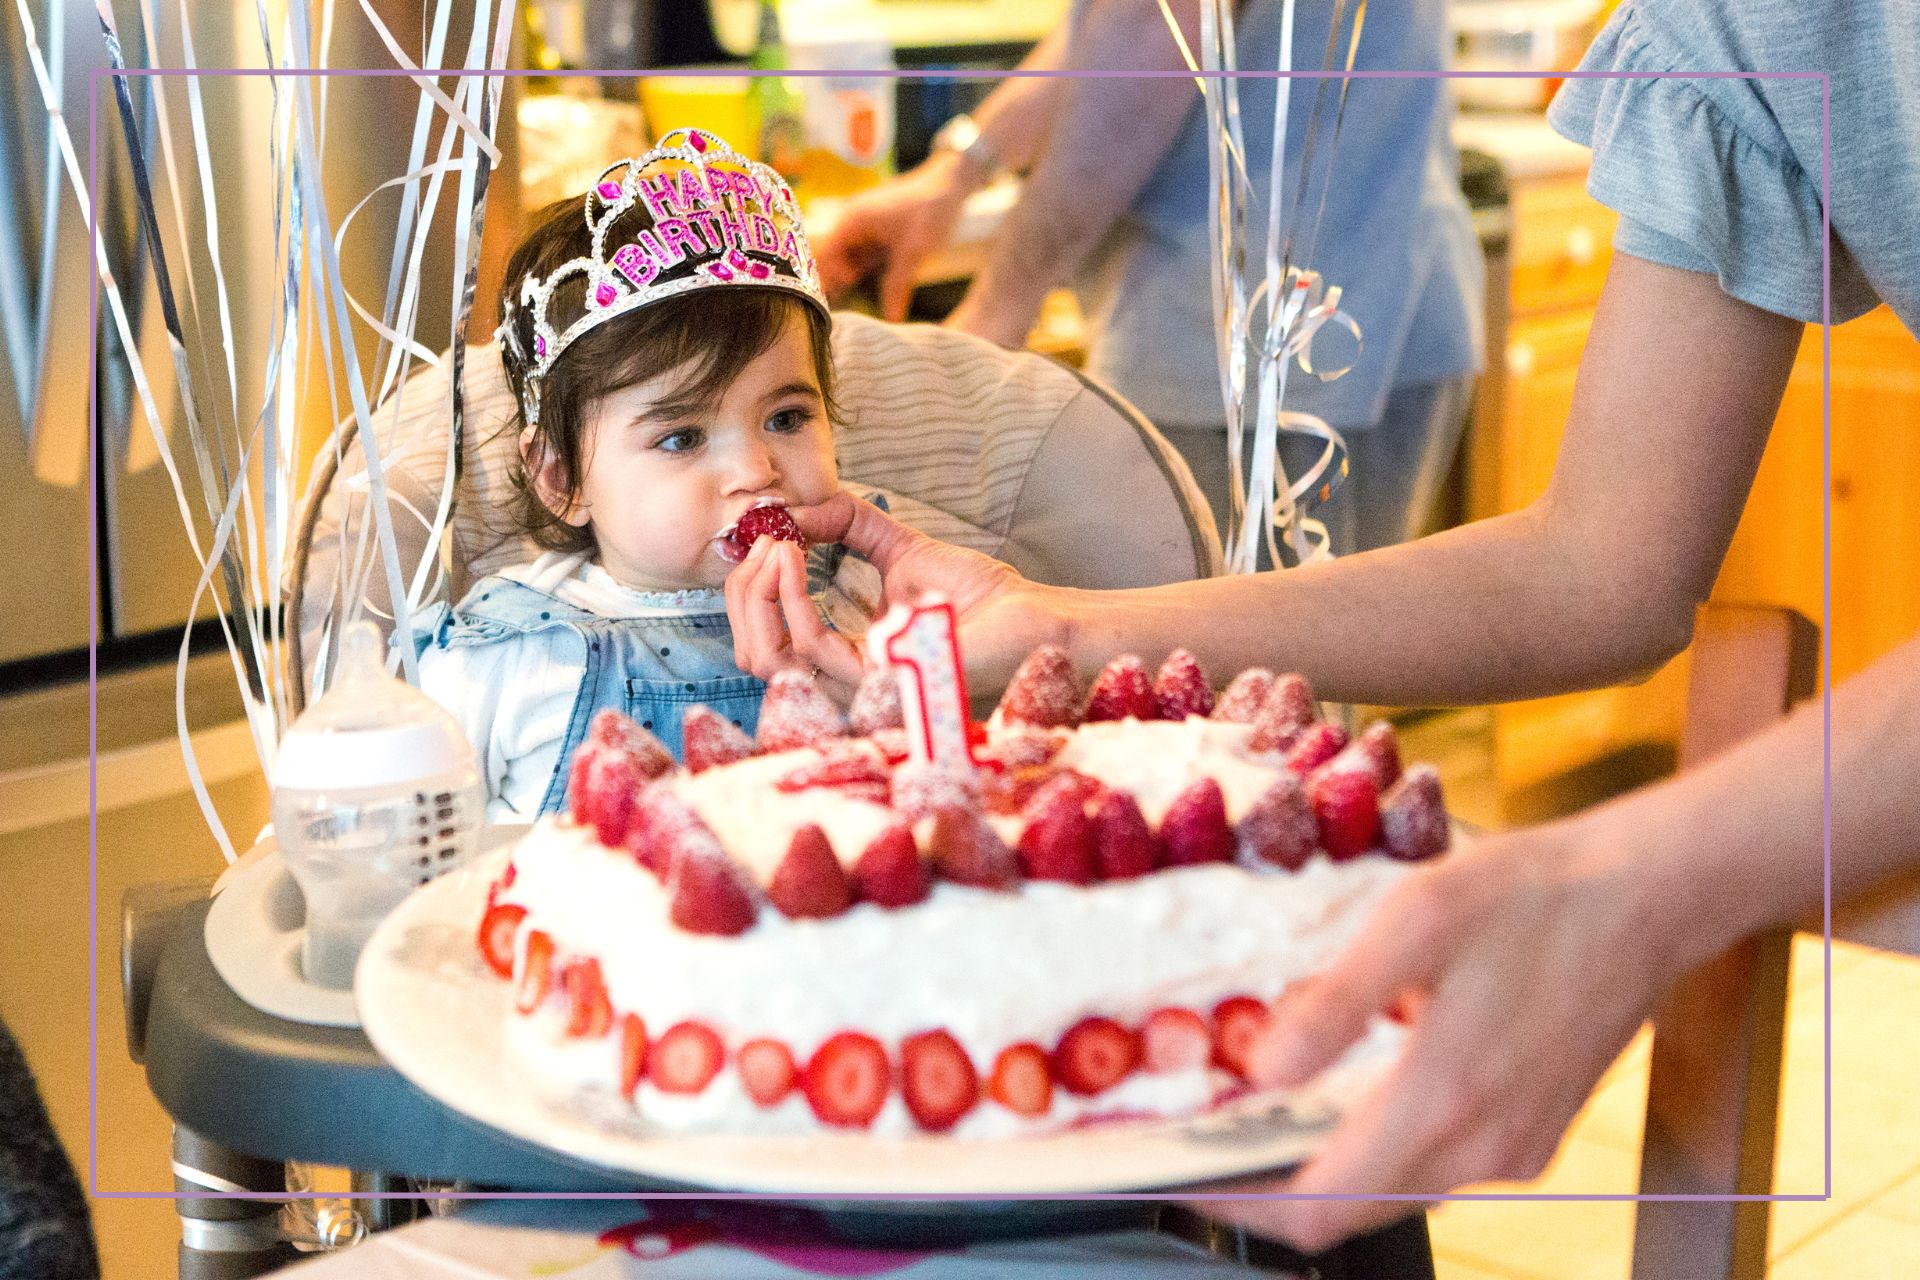 1st birthday party ideas that are fun, easy and budget-friendly